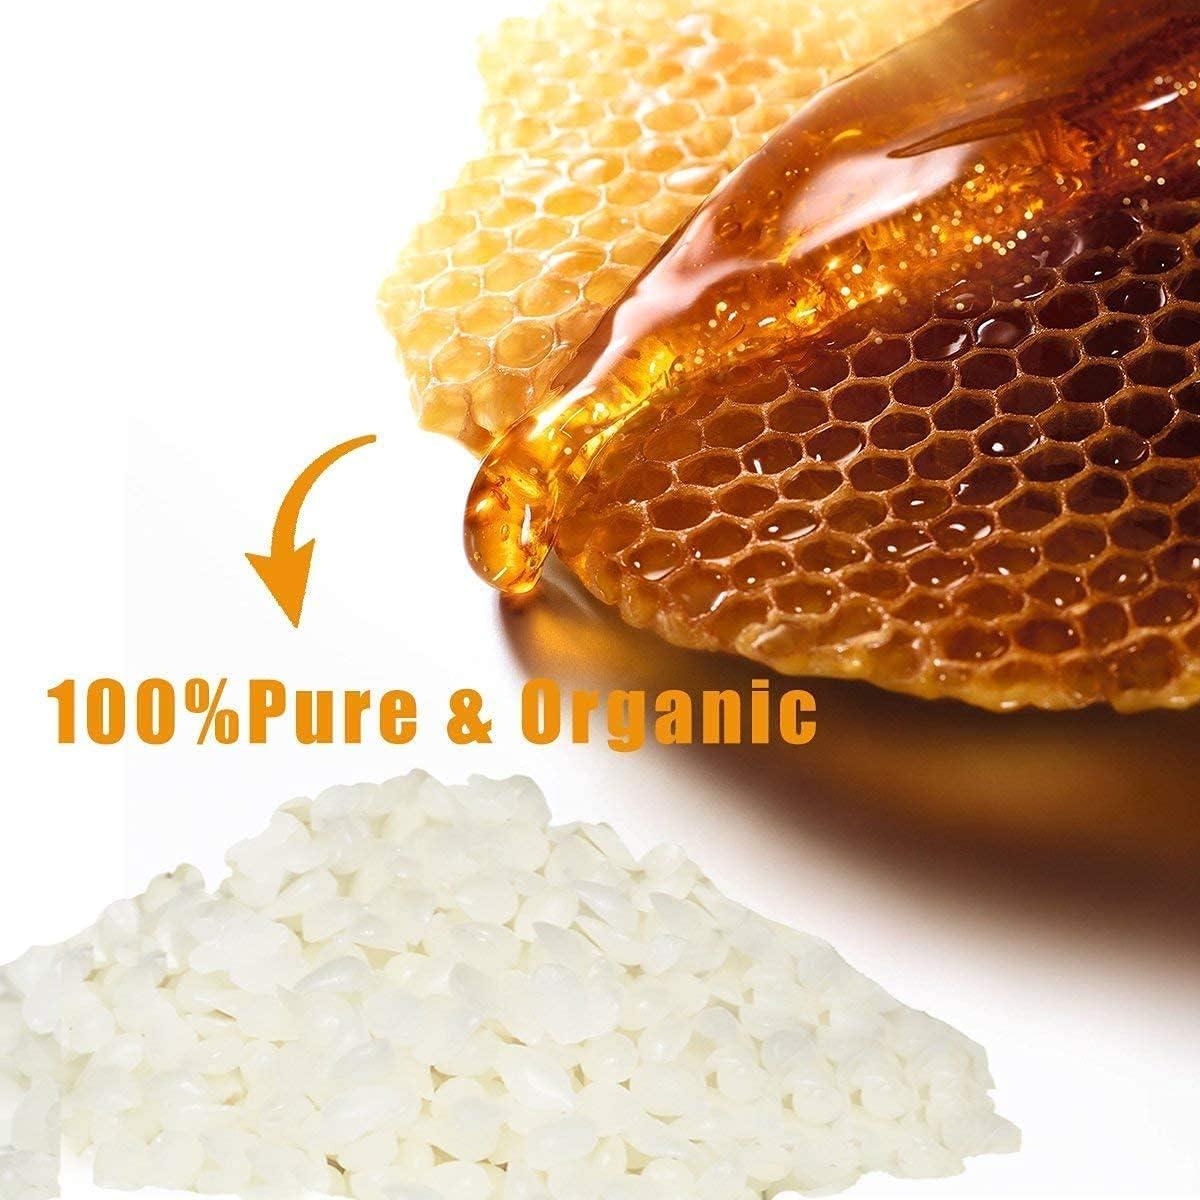 YIH 10-lb Pure White Beeswax Pellets-100% Pure White Beeswax 10 LB